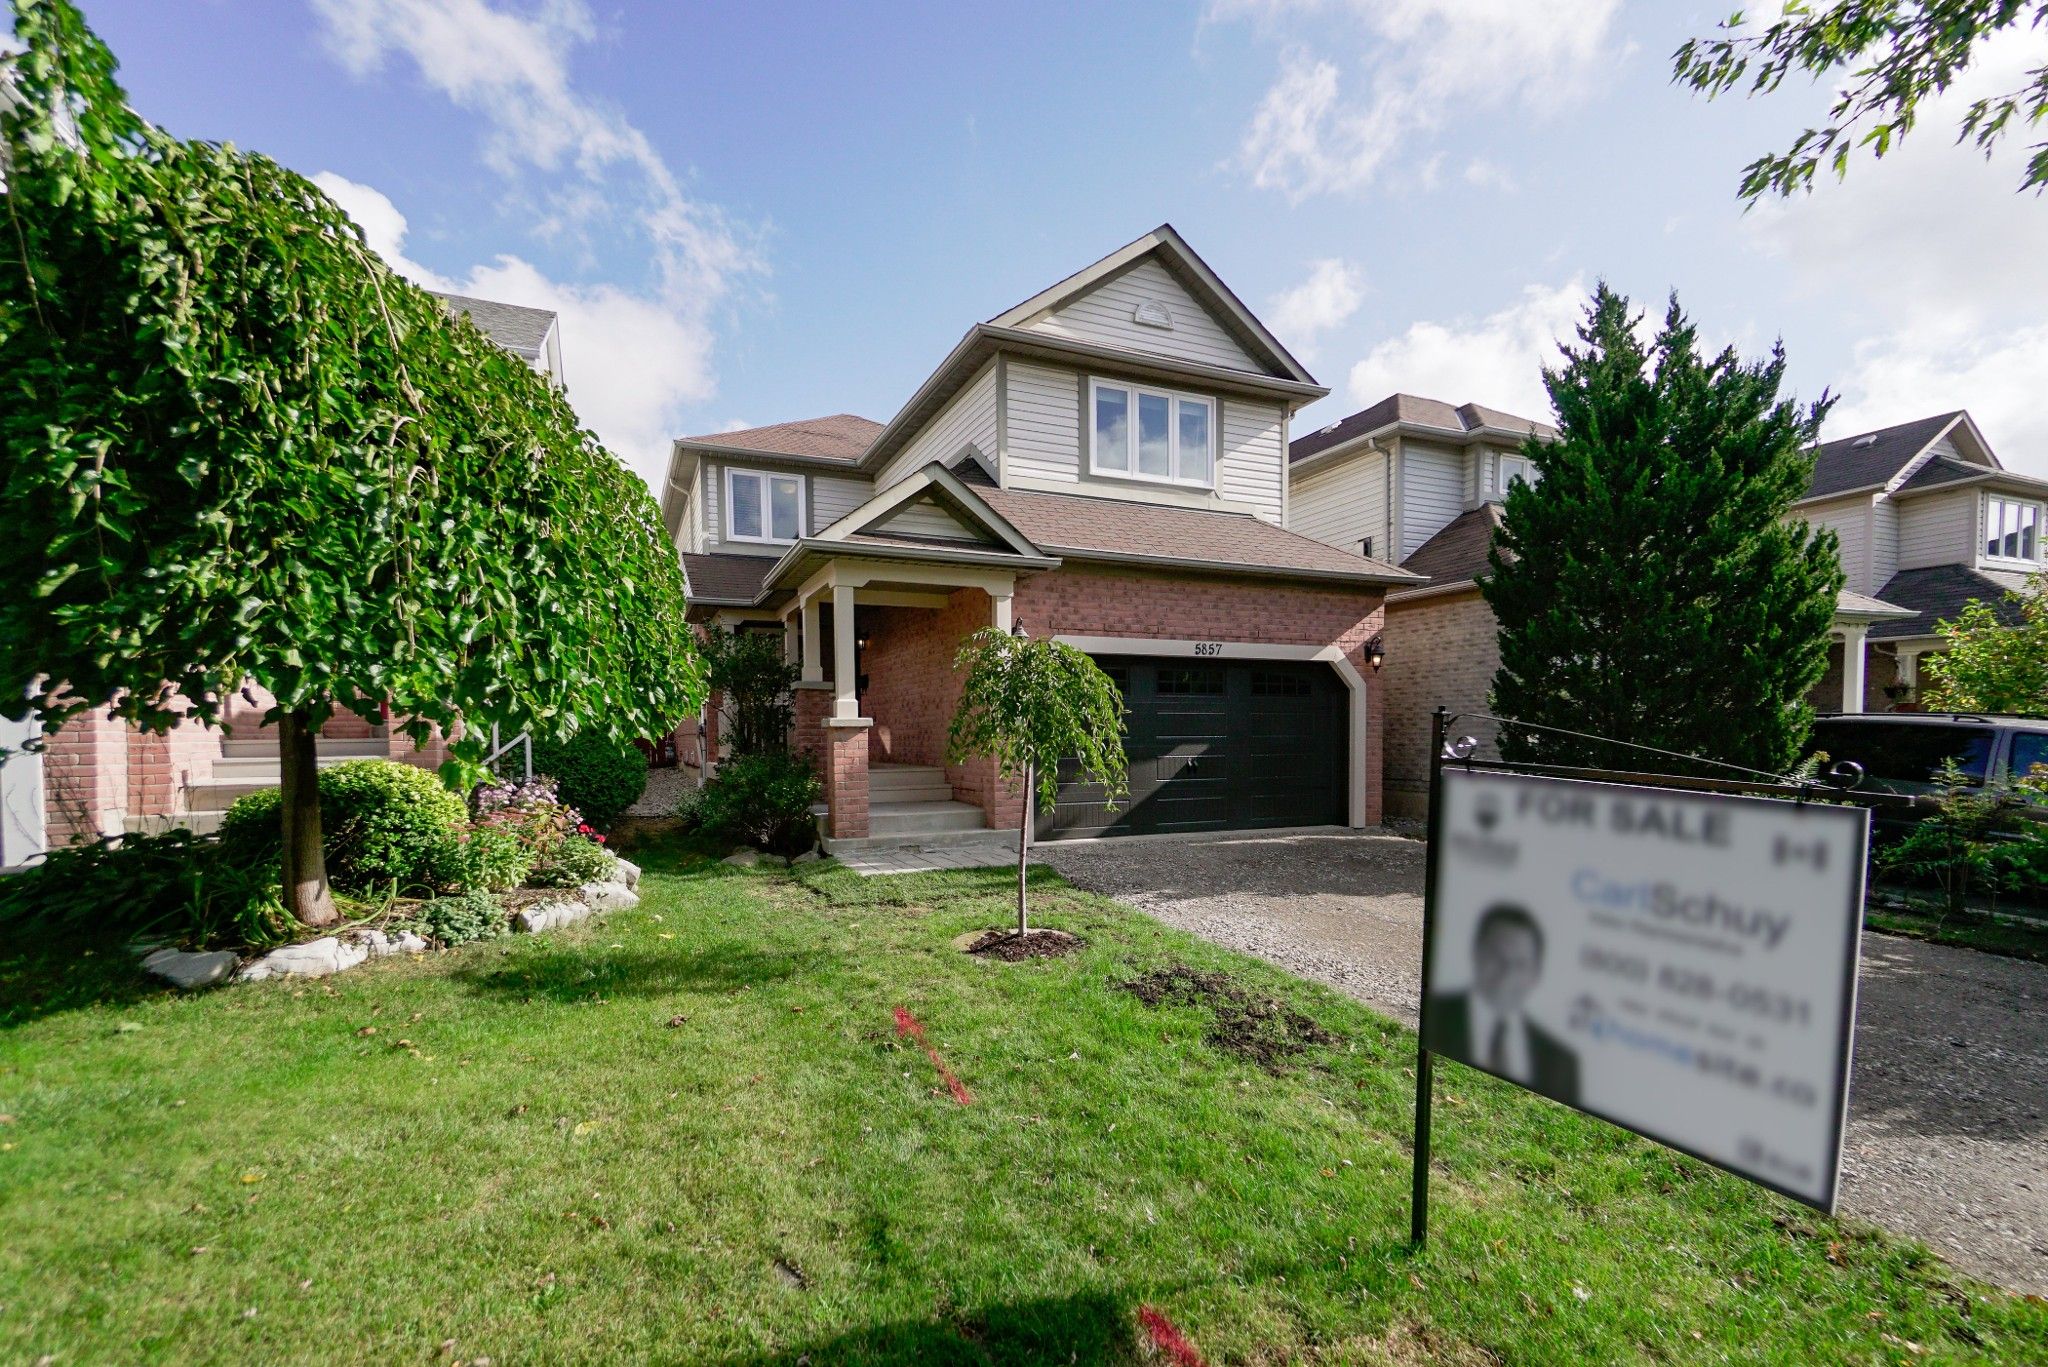 Main Photo: 5857 Dalebrook Crescent in Mississauga: Central Erin Mills House (2-Storey) for sale : MLS®# W4607333